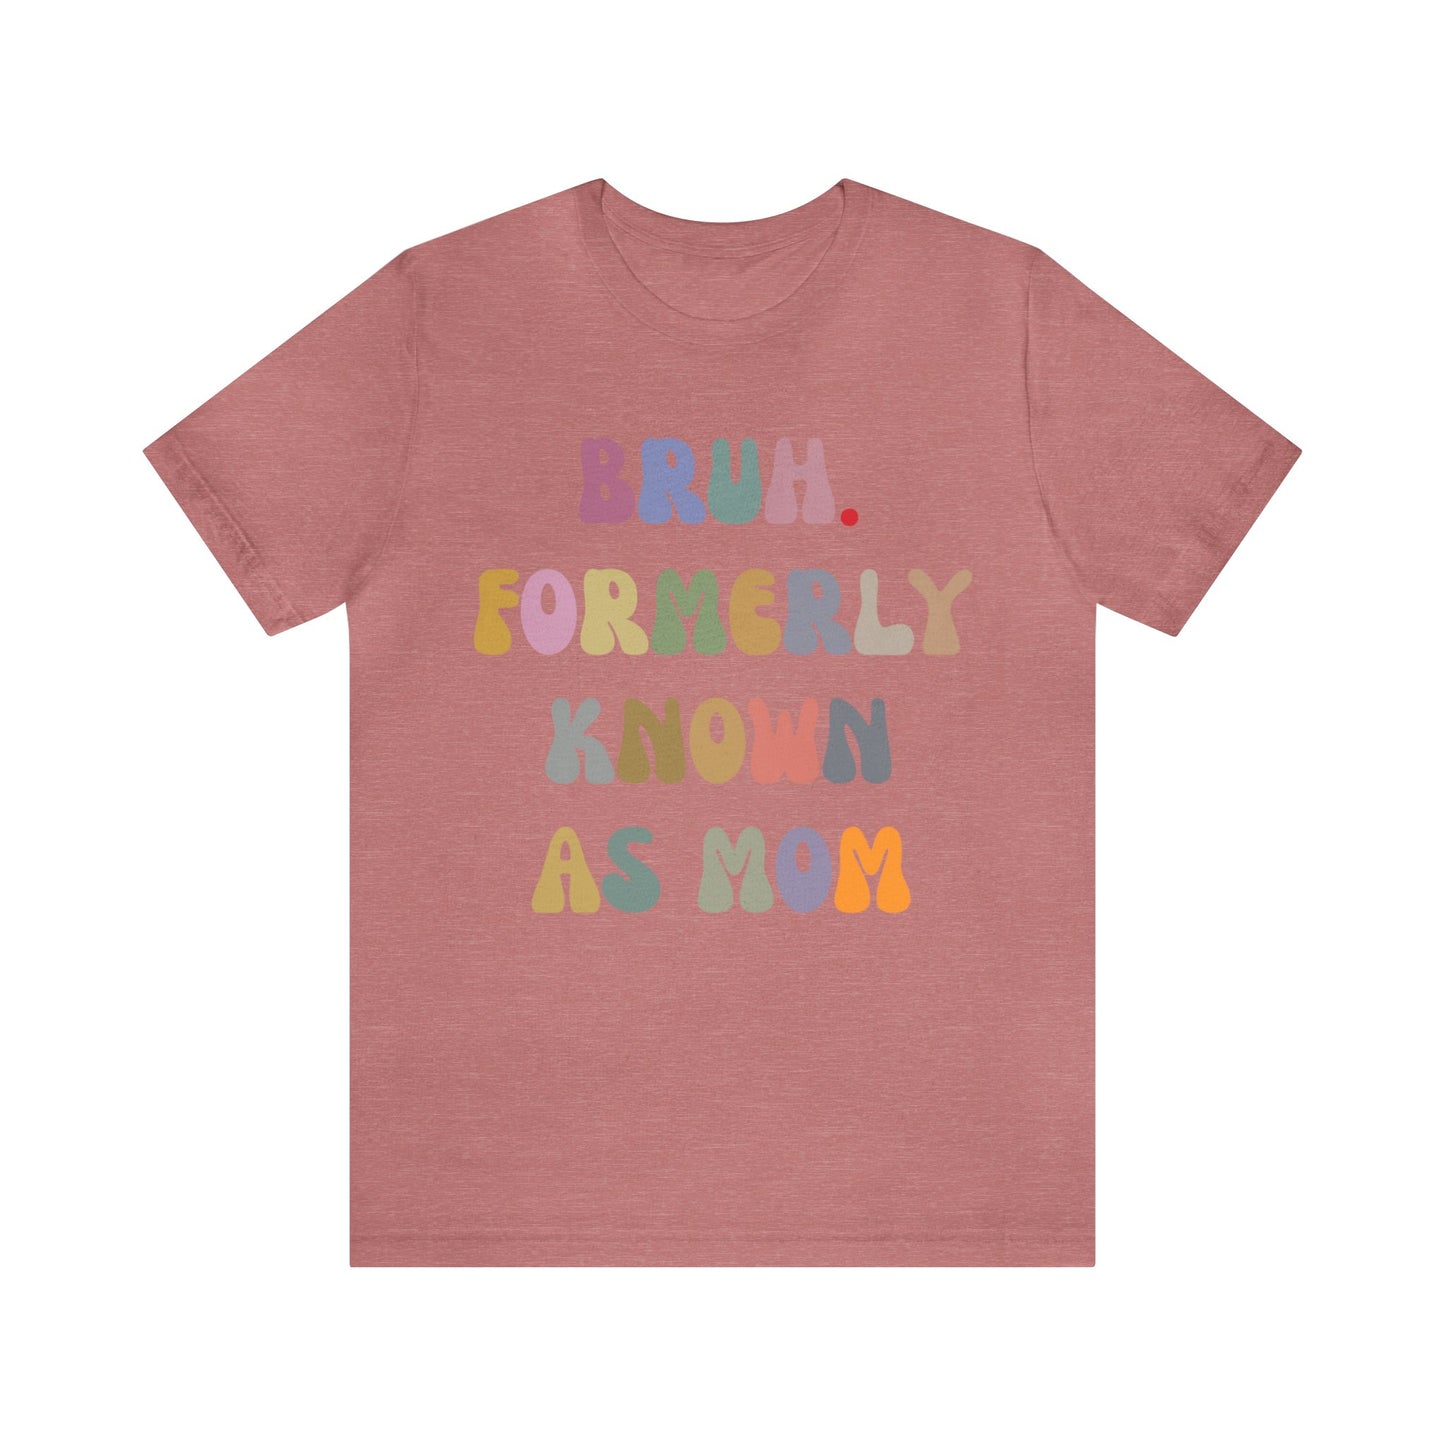 Bruh Formerly Known As Mom Shirt, Mom Mommy Bruh Shirt, Christmas mom T shirt, Bruh Mom Shirt, Sarcastic Mom T shirt, T1216